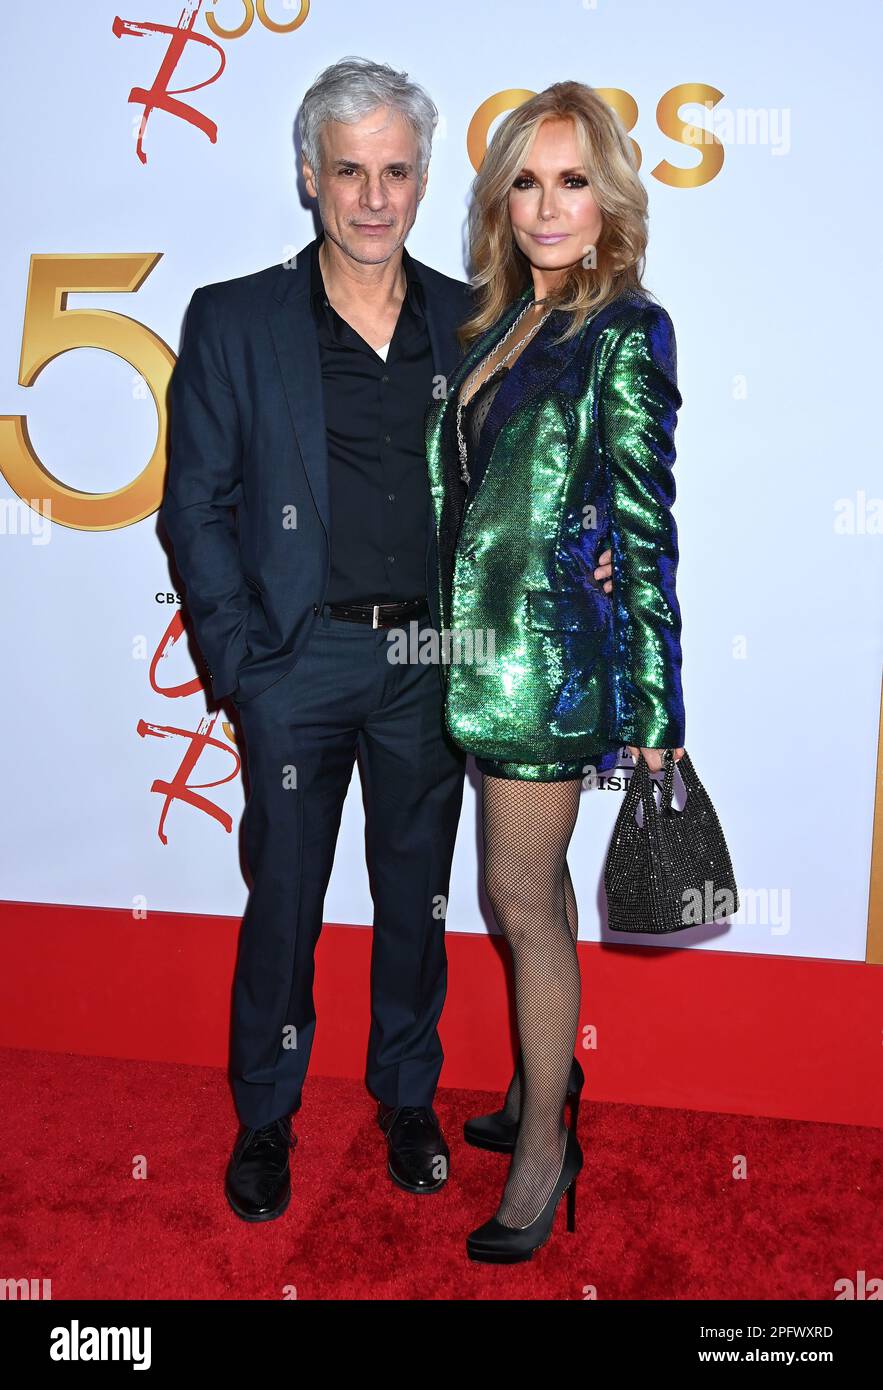 Christian LeBlanc and Tracey Bregman arriving at the 50th Anniversary ...